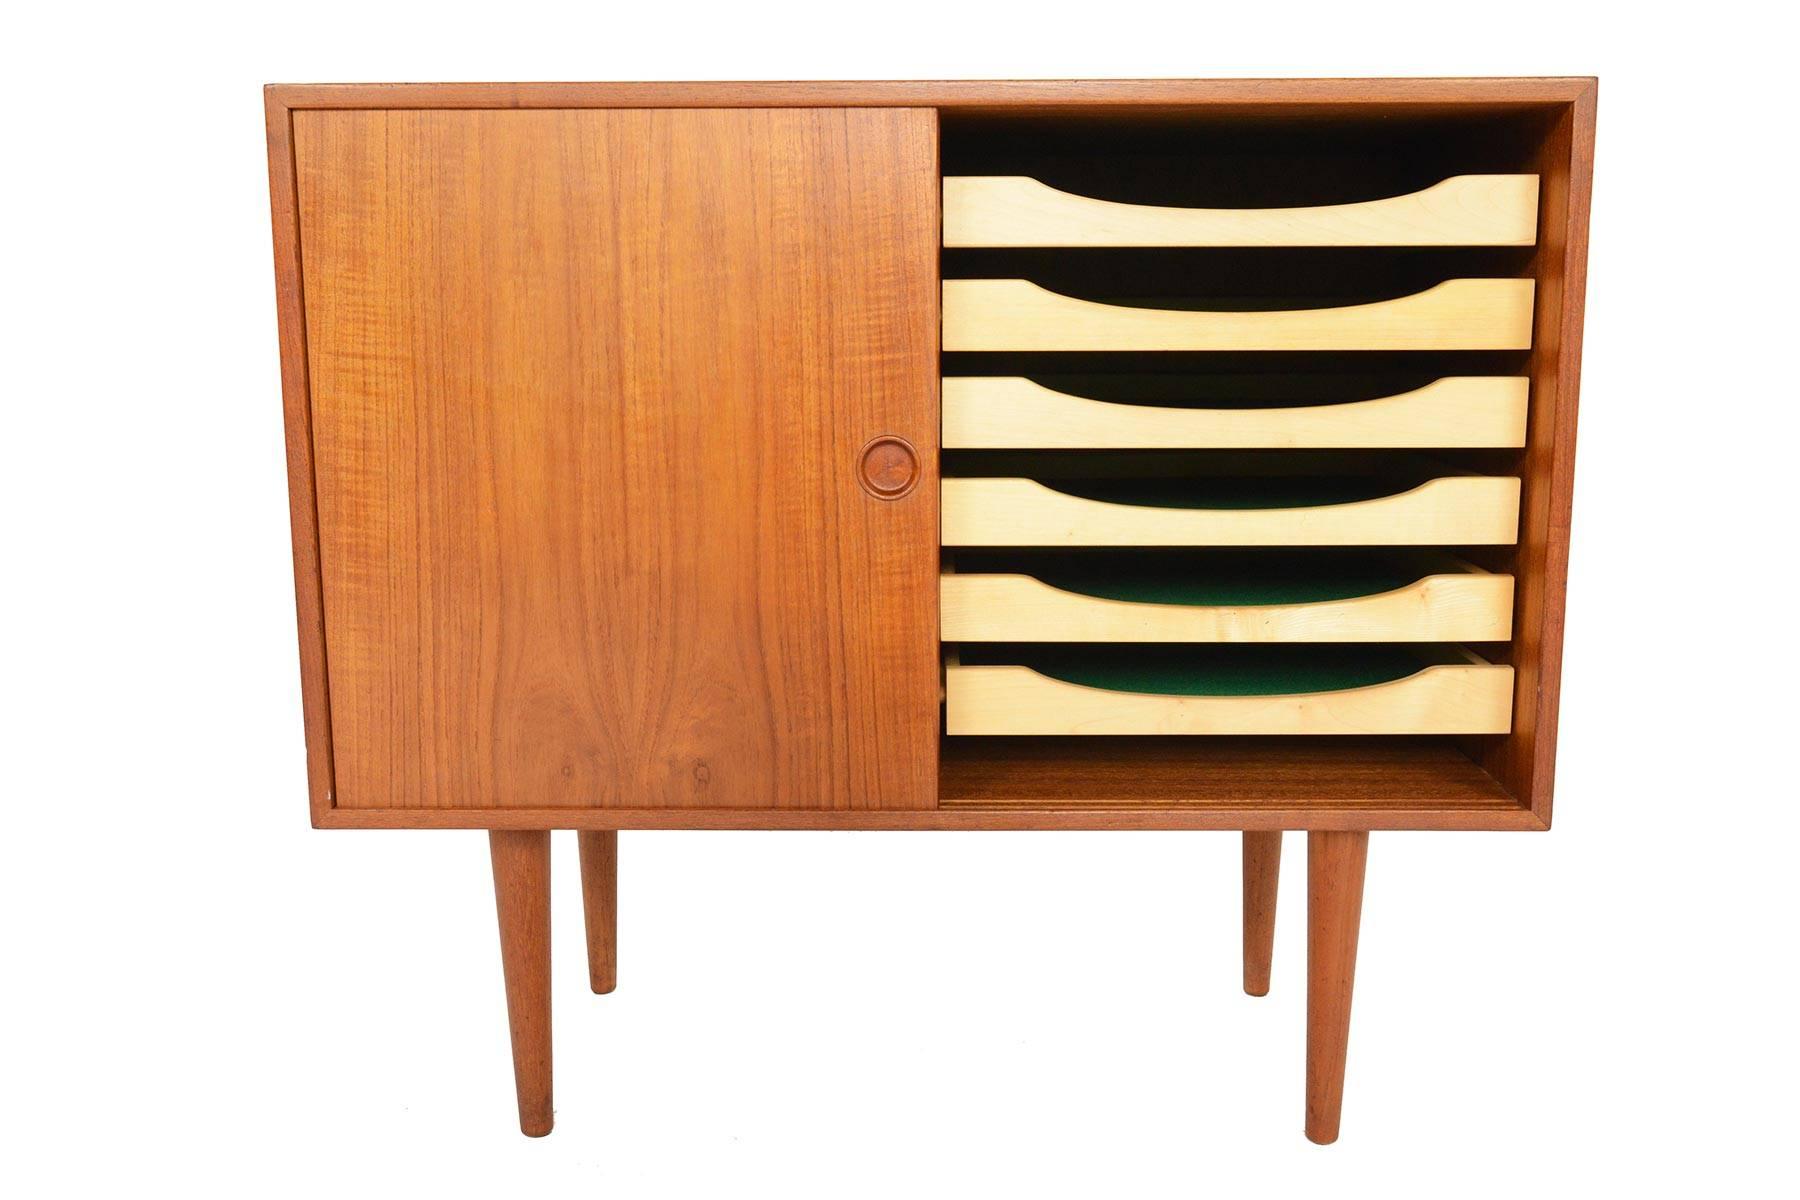 This beautiful small two-door credenza in teak was designed by Kai Kristiansen for Feldballes Møbelfabrik in the 1960s. Two sliding doors open to reveal two bays with three adjustable shelves on the right and six birch flatware drawers on the left.